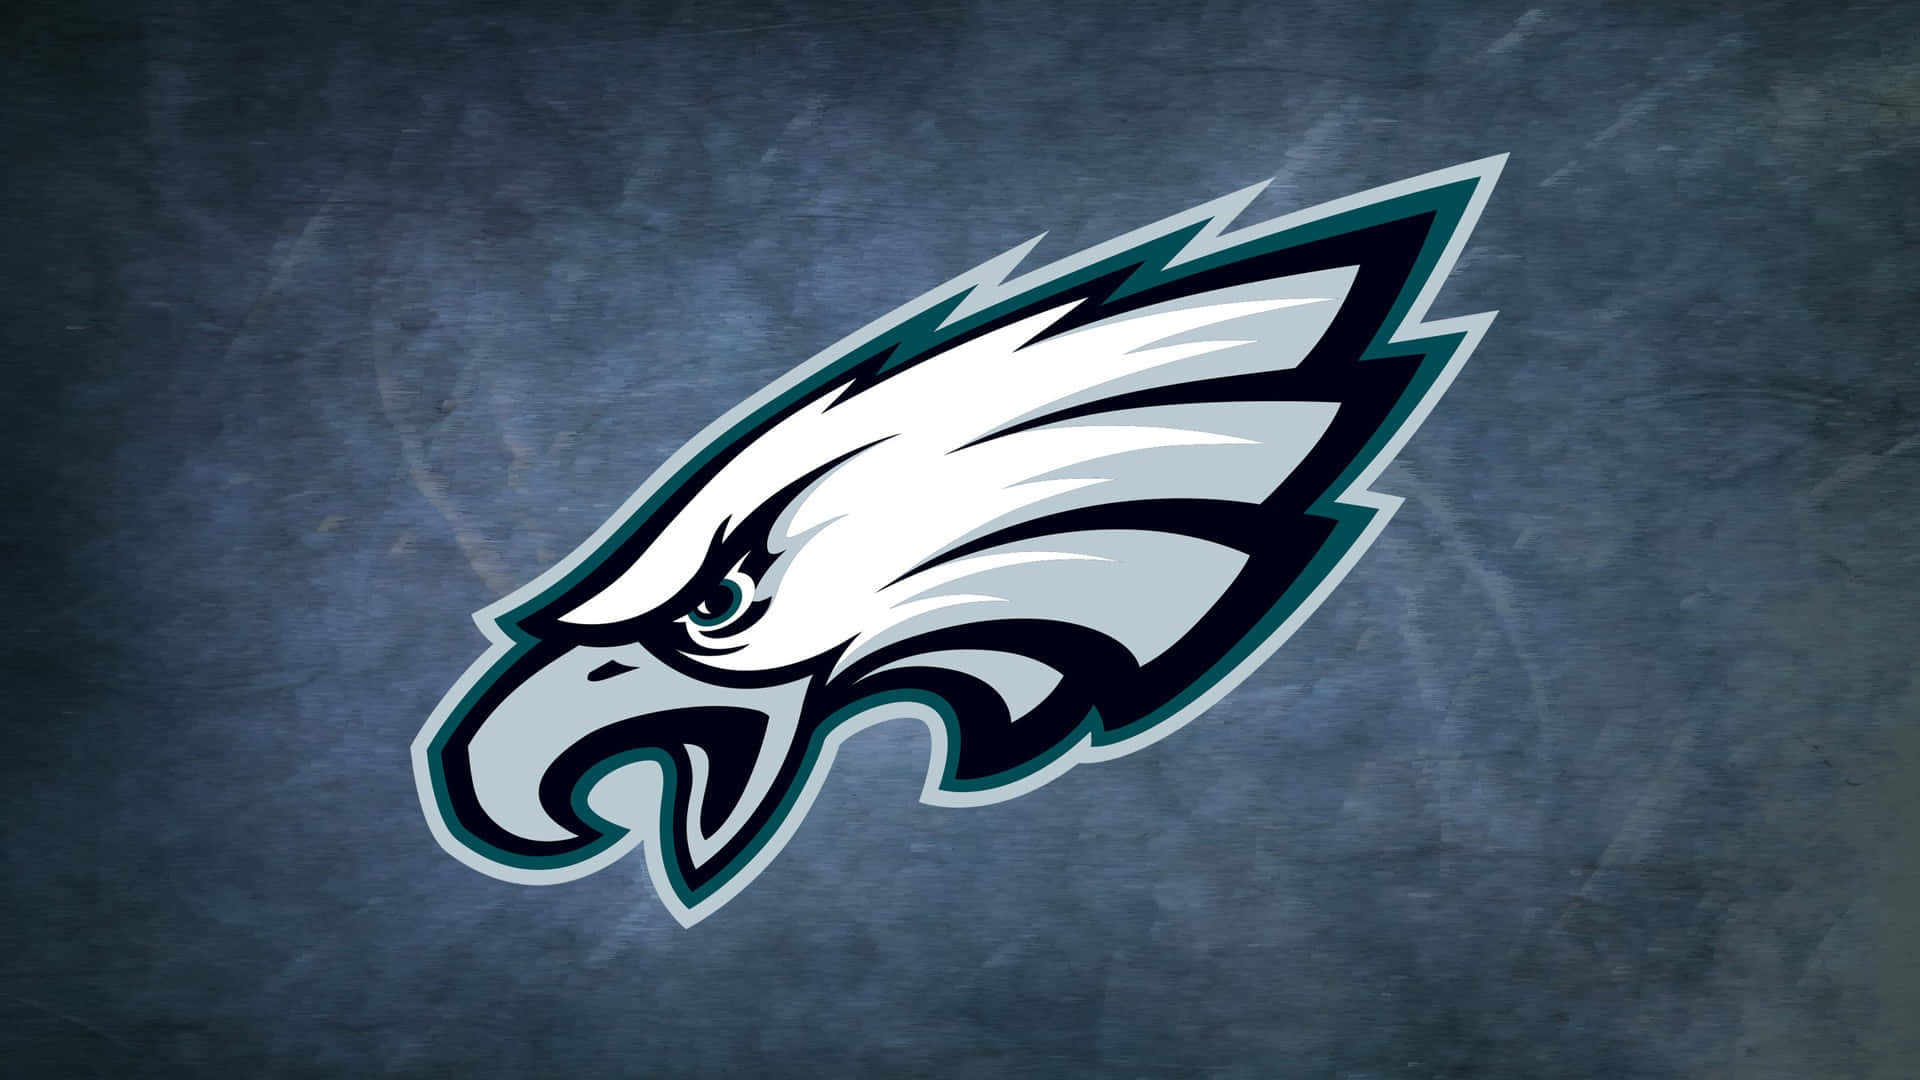 Eagles Football On Smoky Blue Background Wallpaper